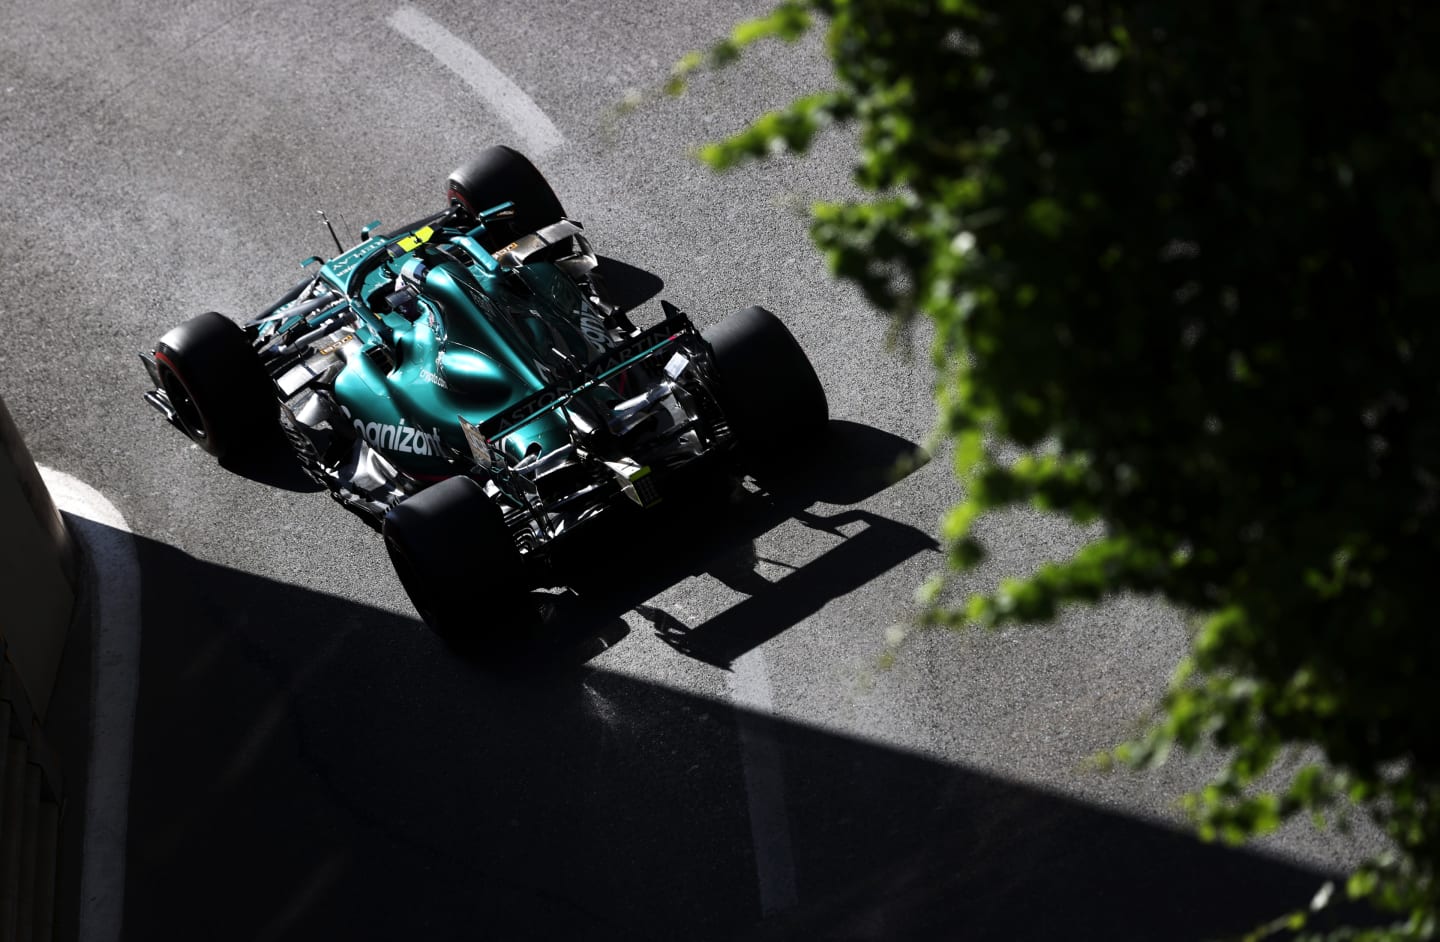 BAKU, AZERBAIJAN - JUNE 05: Sebastian Vettel of Germany driving the (5) Aston Martin AMR21 Mercedes on track during qualifying ahead of the F1 Grand Prix of Azerbaijan at Baku City Circuit on June 05, 2021 in Baku, Azerbaijan. (Photo by Clive Rose/Getty Images)